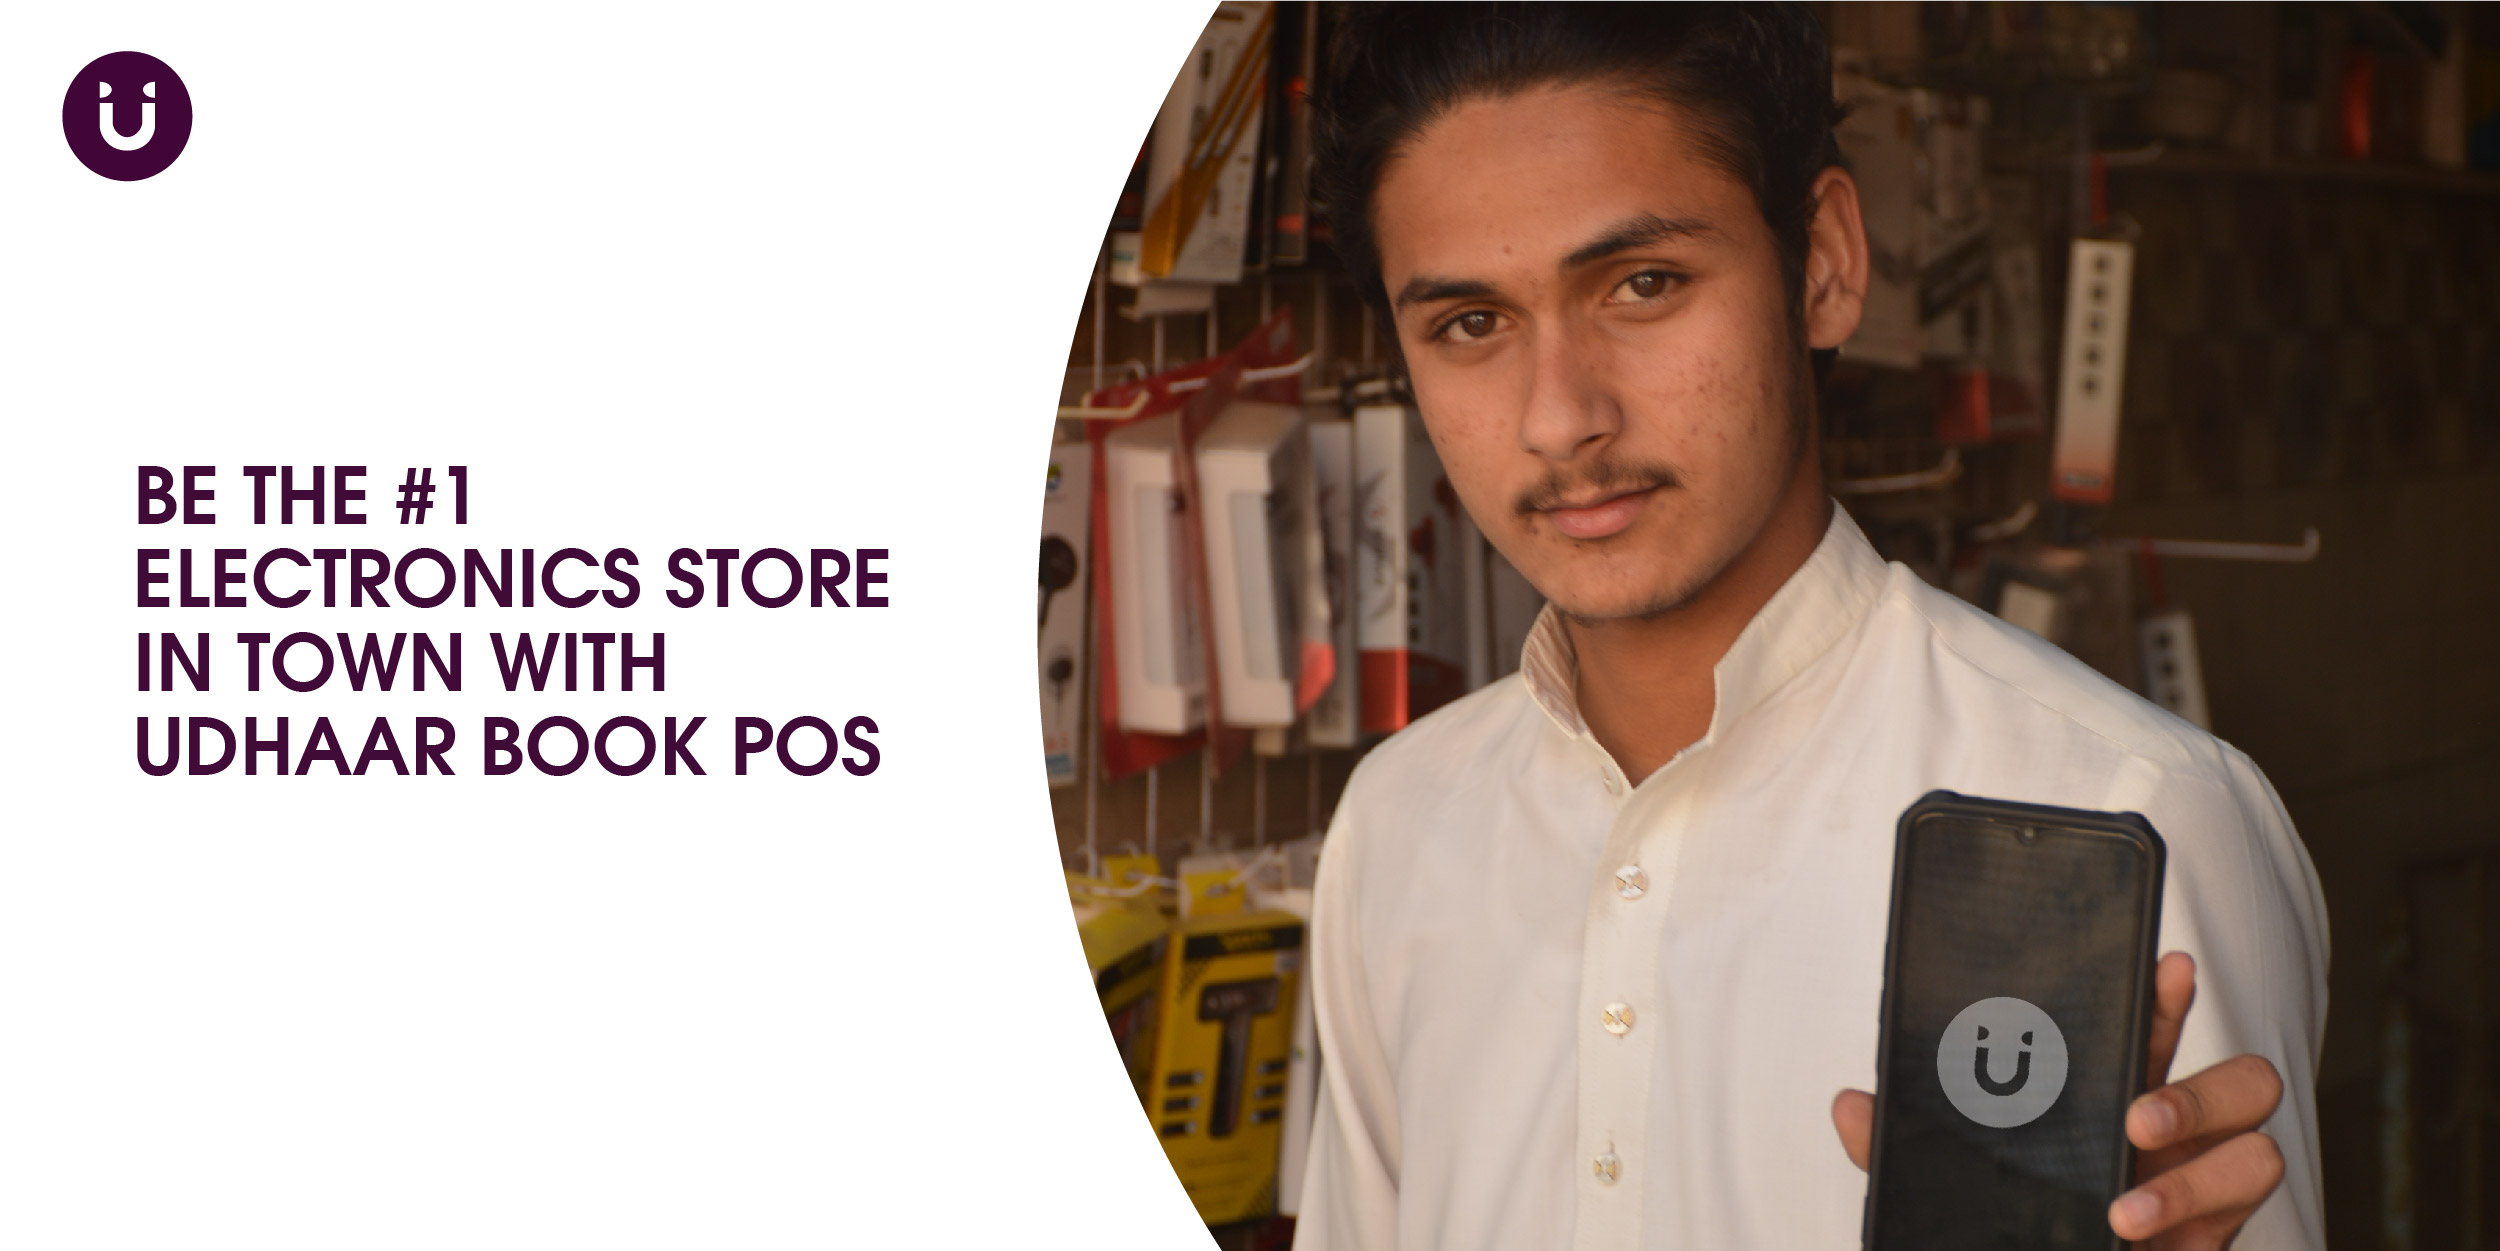 Be the #1 Electronics Store in Town with Udhaar Book POS